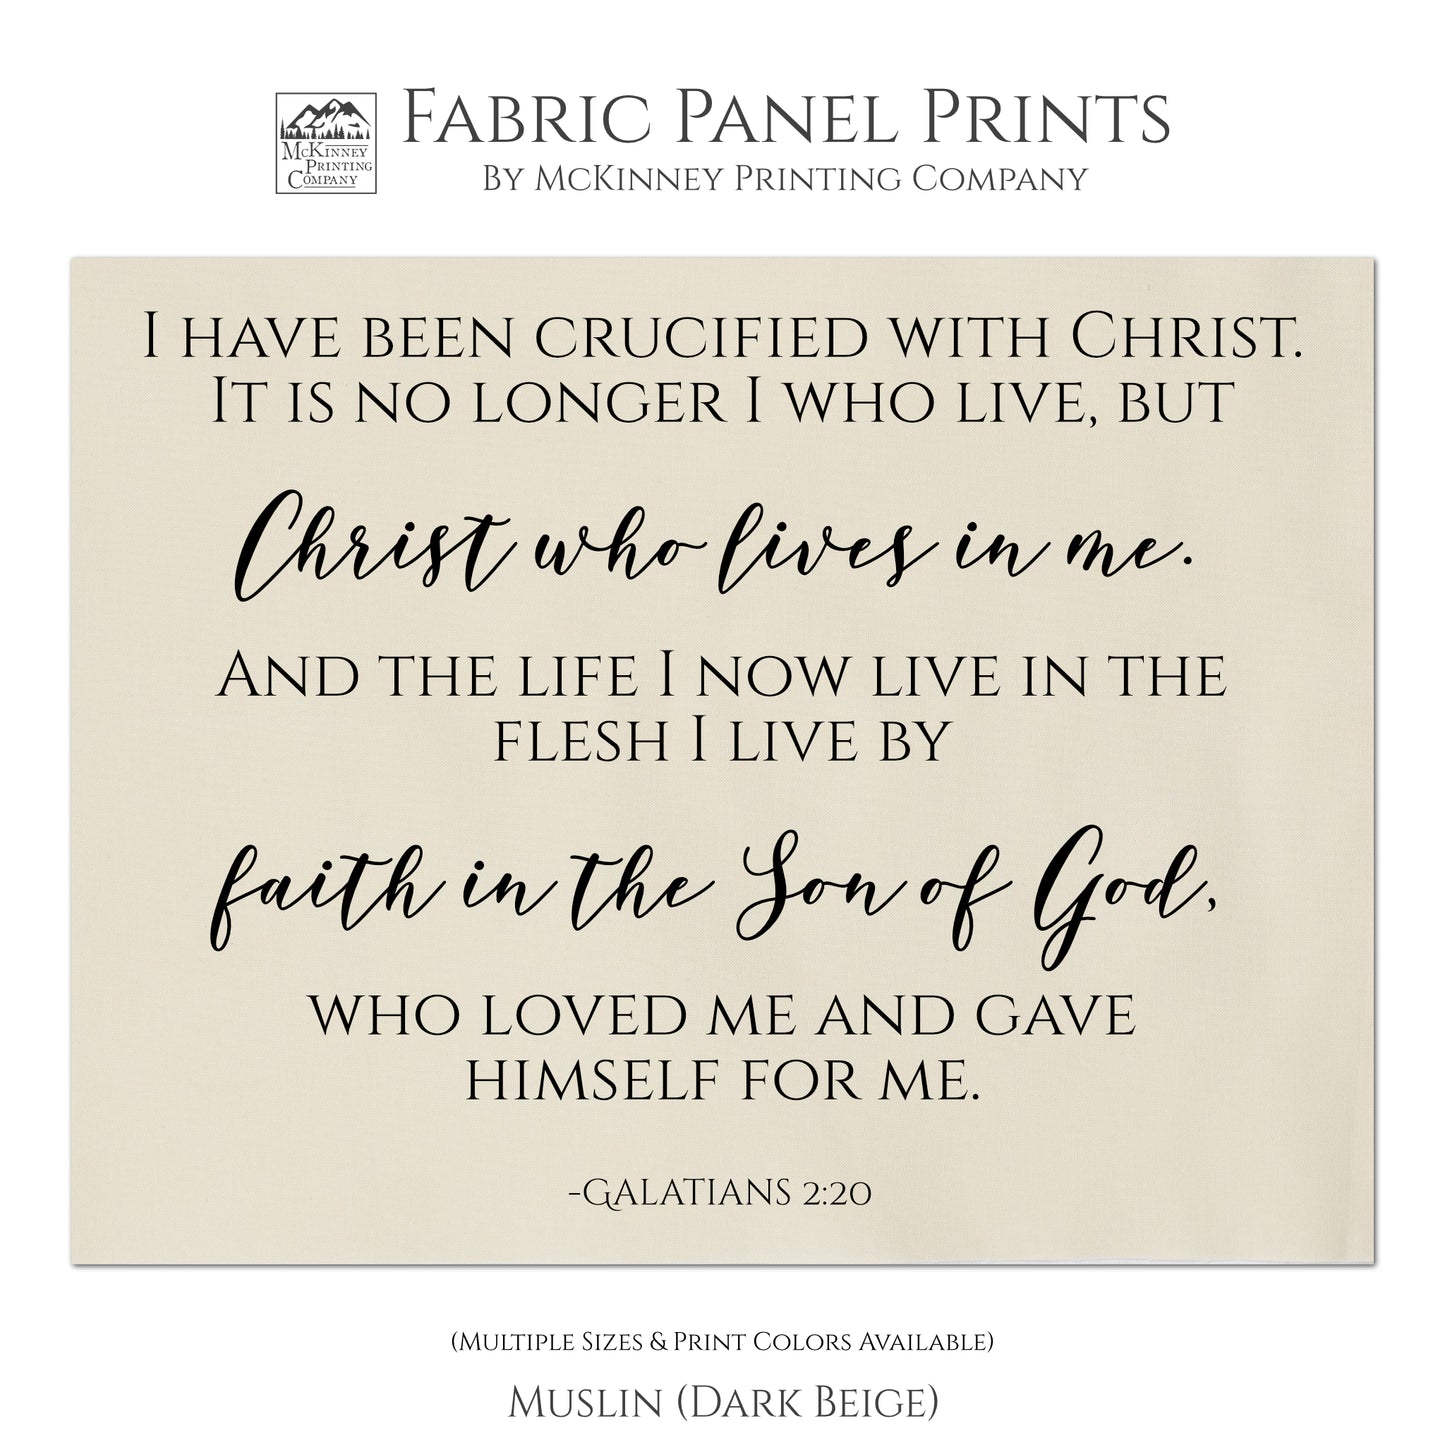 I have been crucified with Christ. It is no longer I who live, but, Christ who lives in me. And the life I now live in the flesh I live by faith in the Son of God, who loved me and gave himself for me. - Galatians 2:20, Religions Fabric, Scripture, Quilt Fabric Panel - Muslin